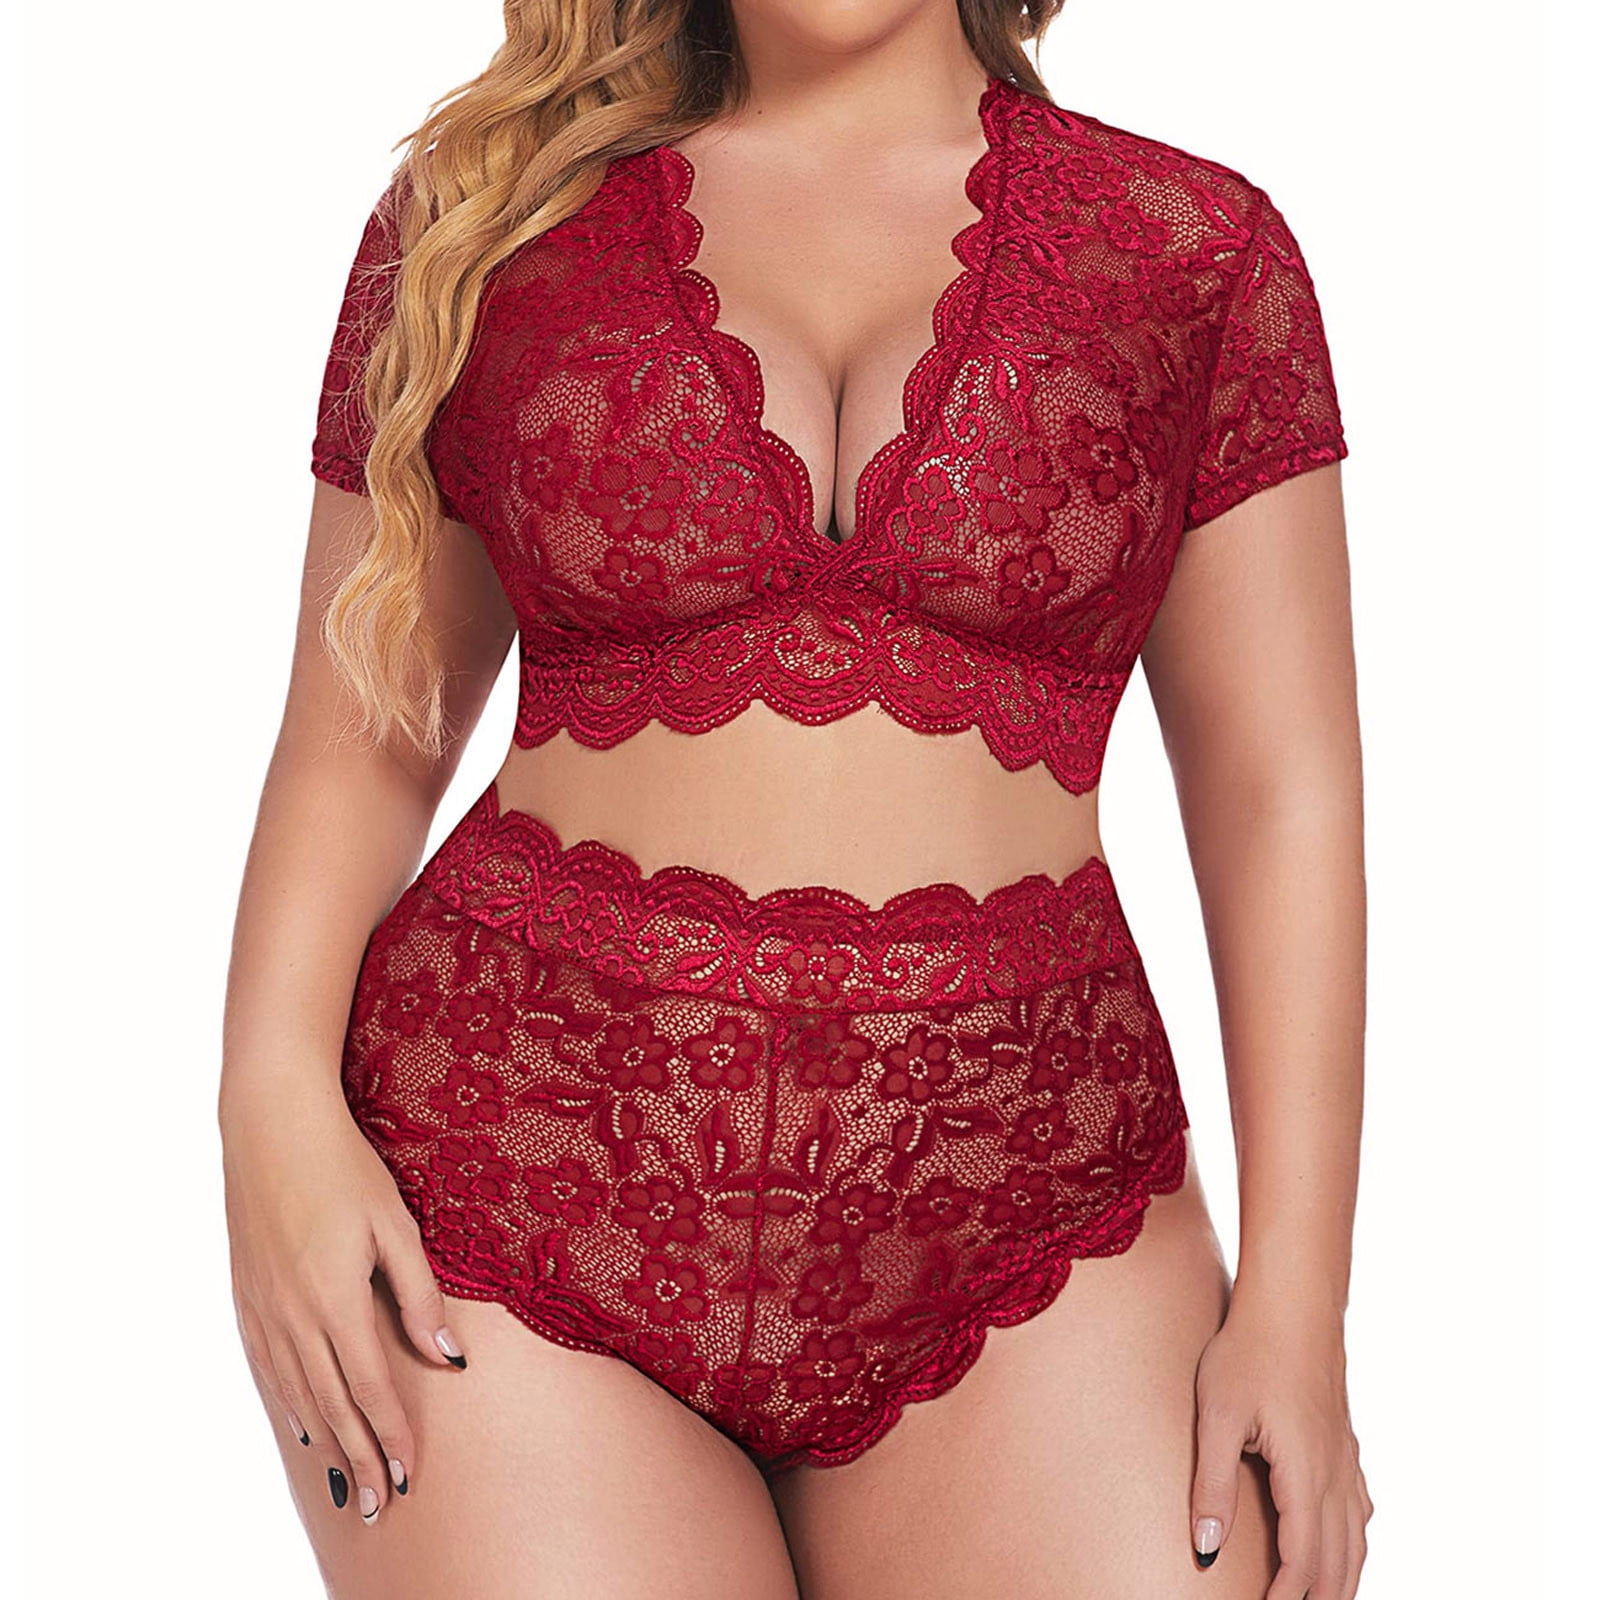 34h bra size, matching cotton bra and panty sets, bare lingerie, most  comfortable panties, women nylons, longline sports bra, best compression  bras, rhinestone bustier plus size, large bust : : Fashion